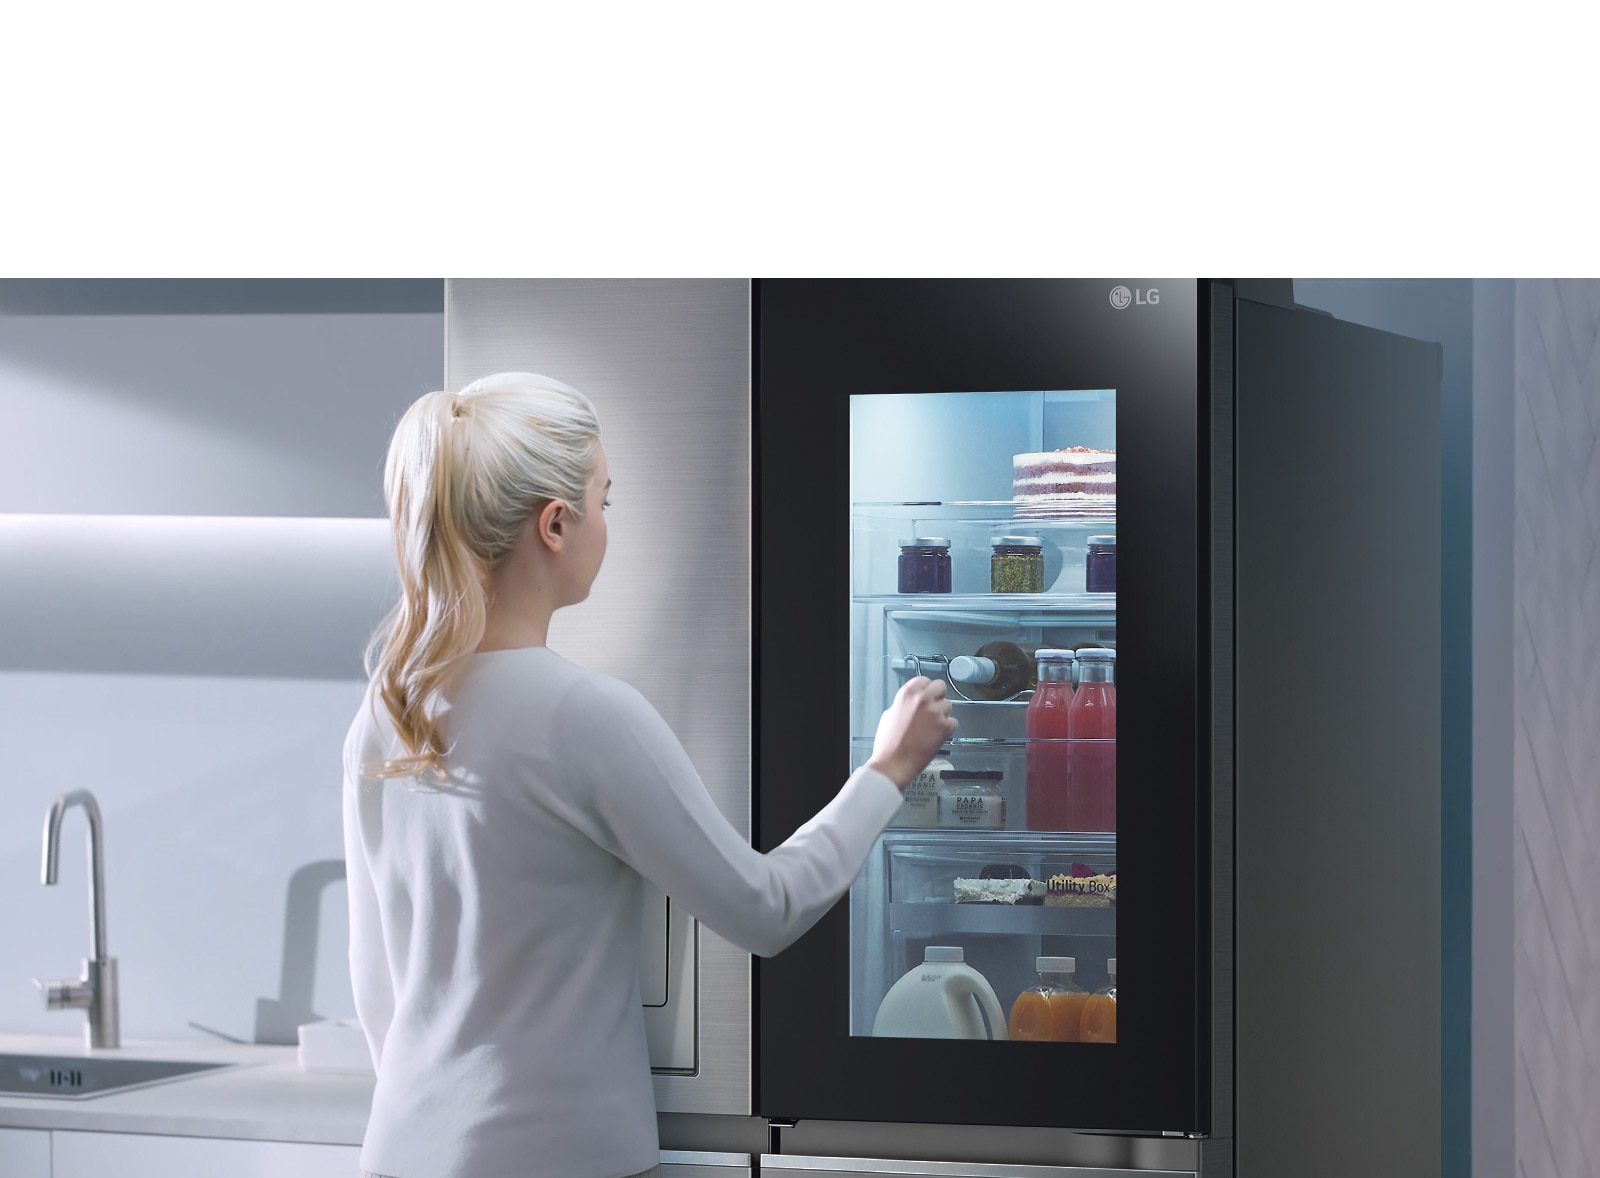 One video shows a woman walking up to her InstaView refrigerator and tapping twice. The interior lights up and you can see the contents of your fridge without opening the door. The view zooms in to focus on the drinks at the door and then zooms out to see the woman from behind as she opens the door and has a drink.